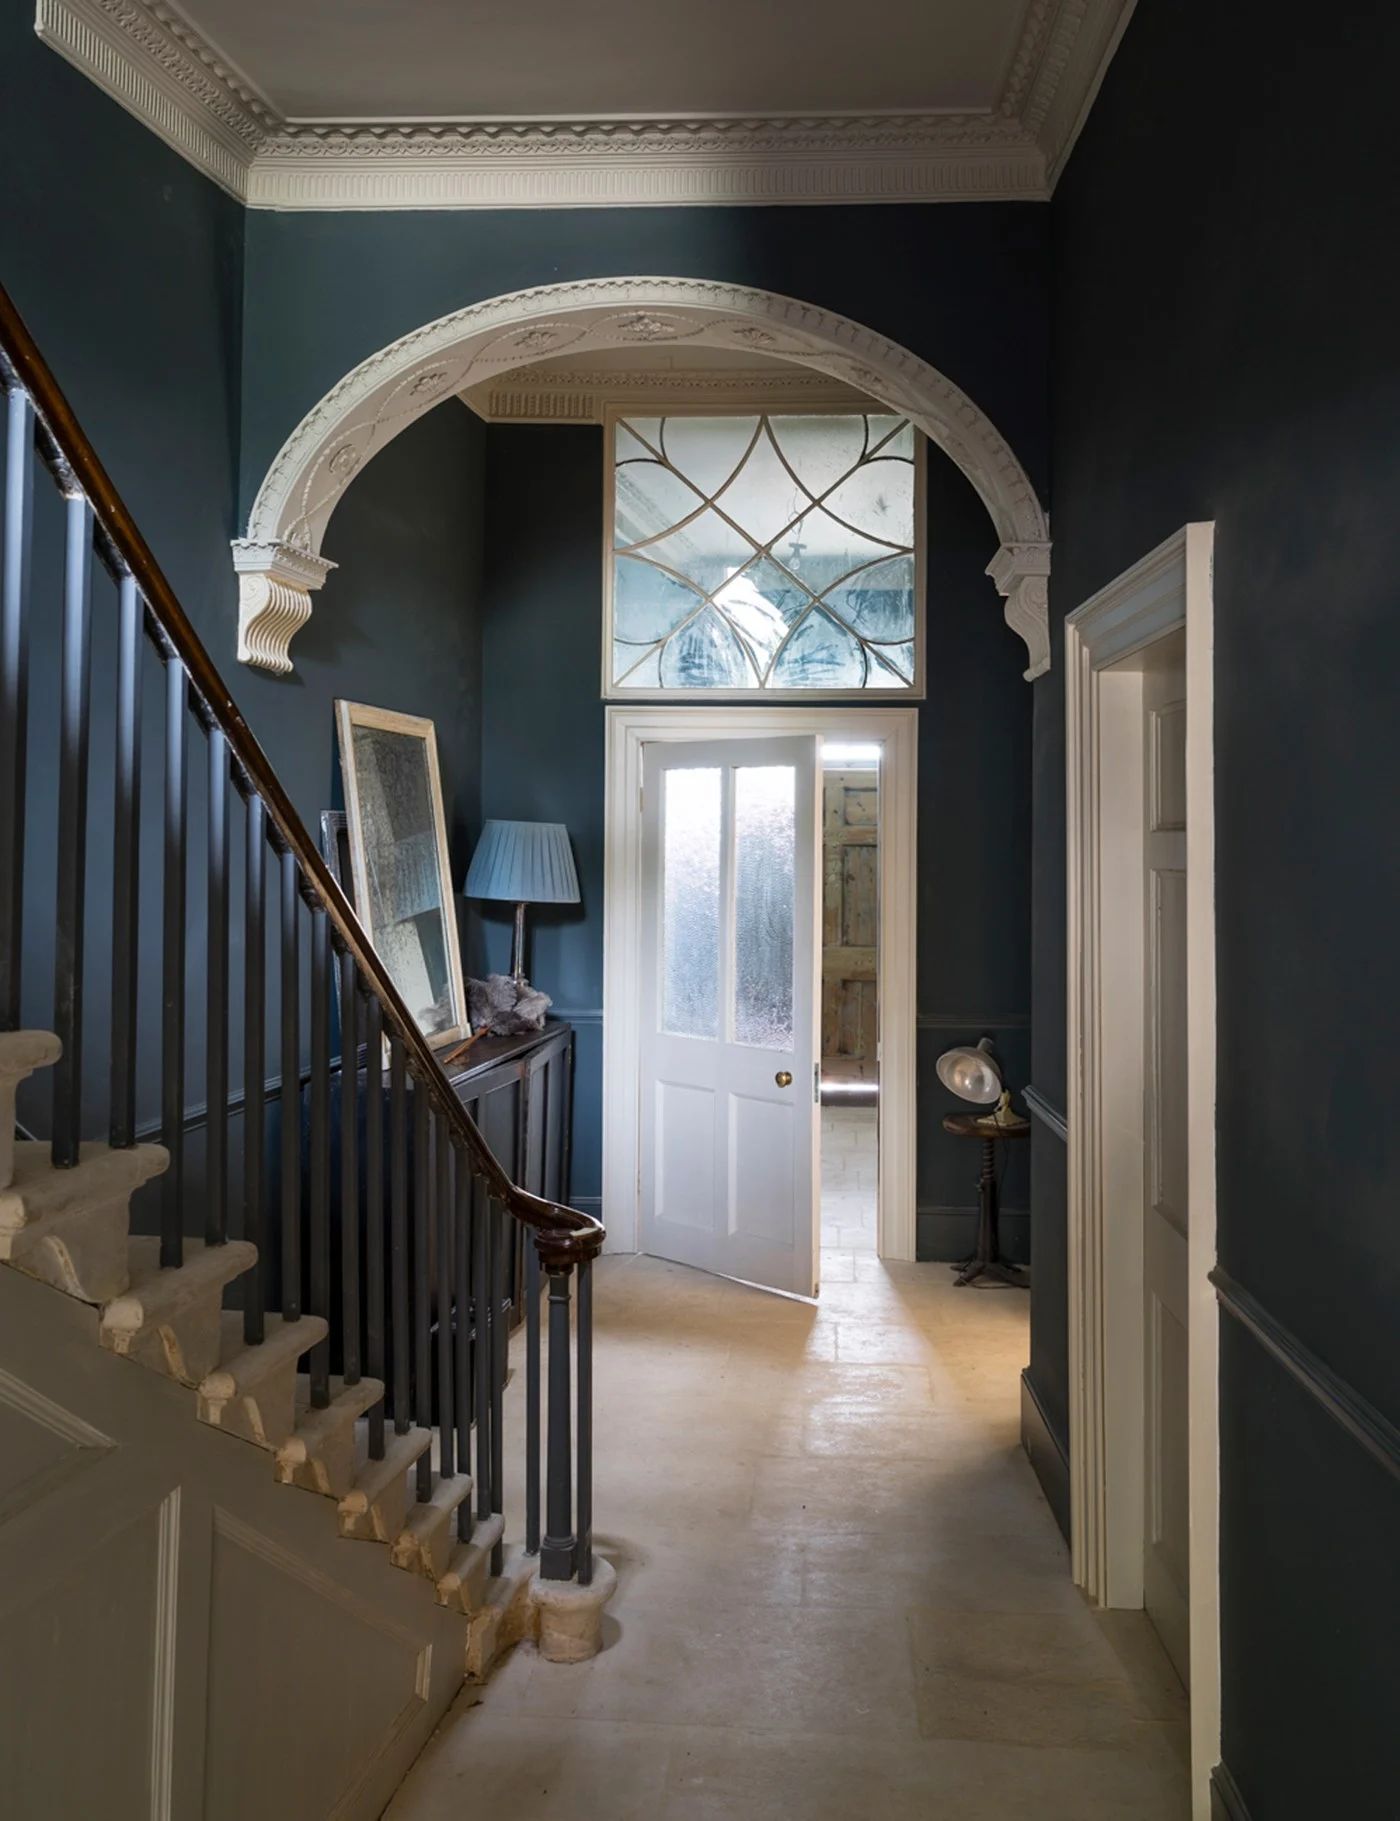 Contrasting White To Enhance The Moldings